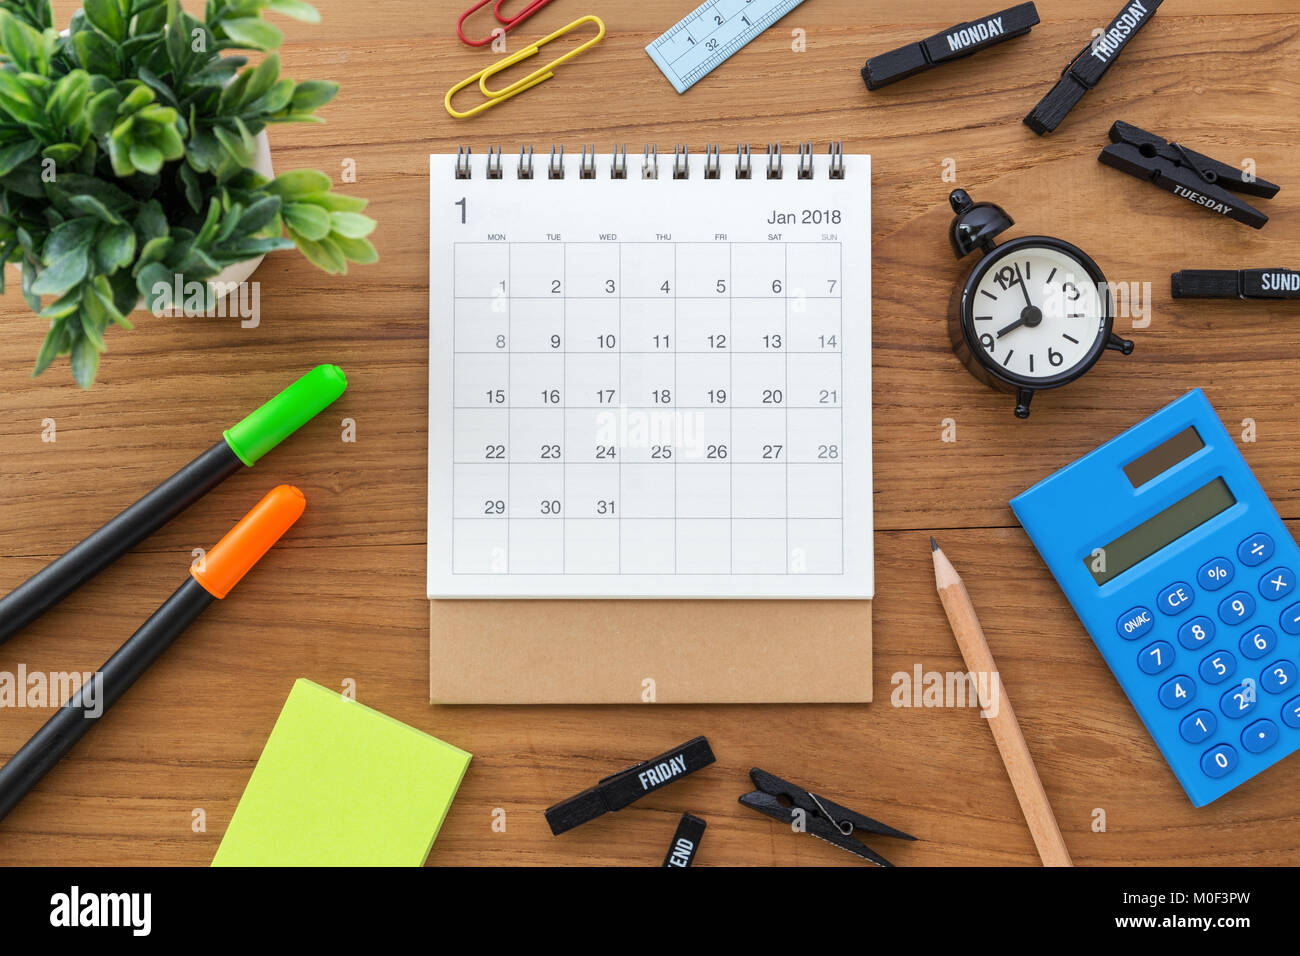 Calendar on wooden table with clock and calculator from top view Stock Photo